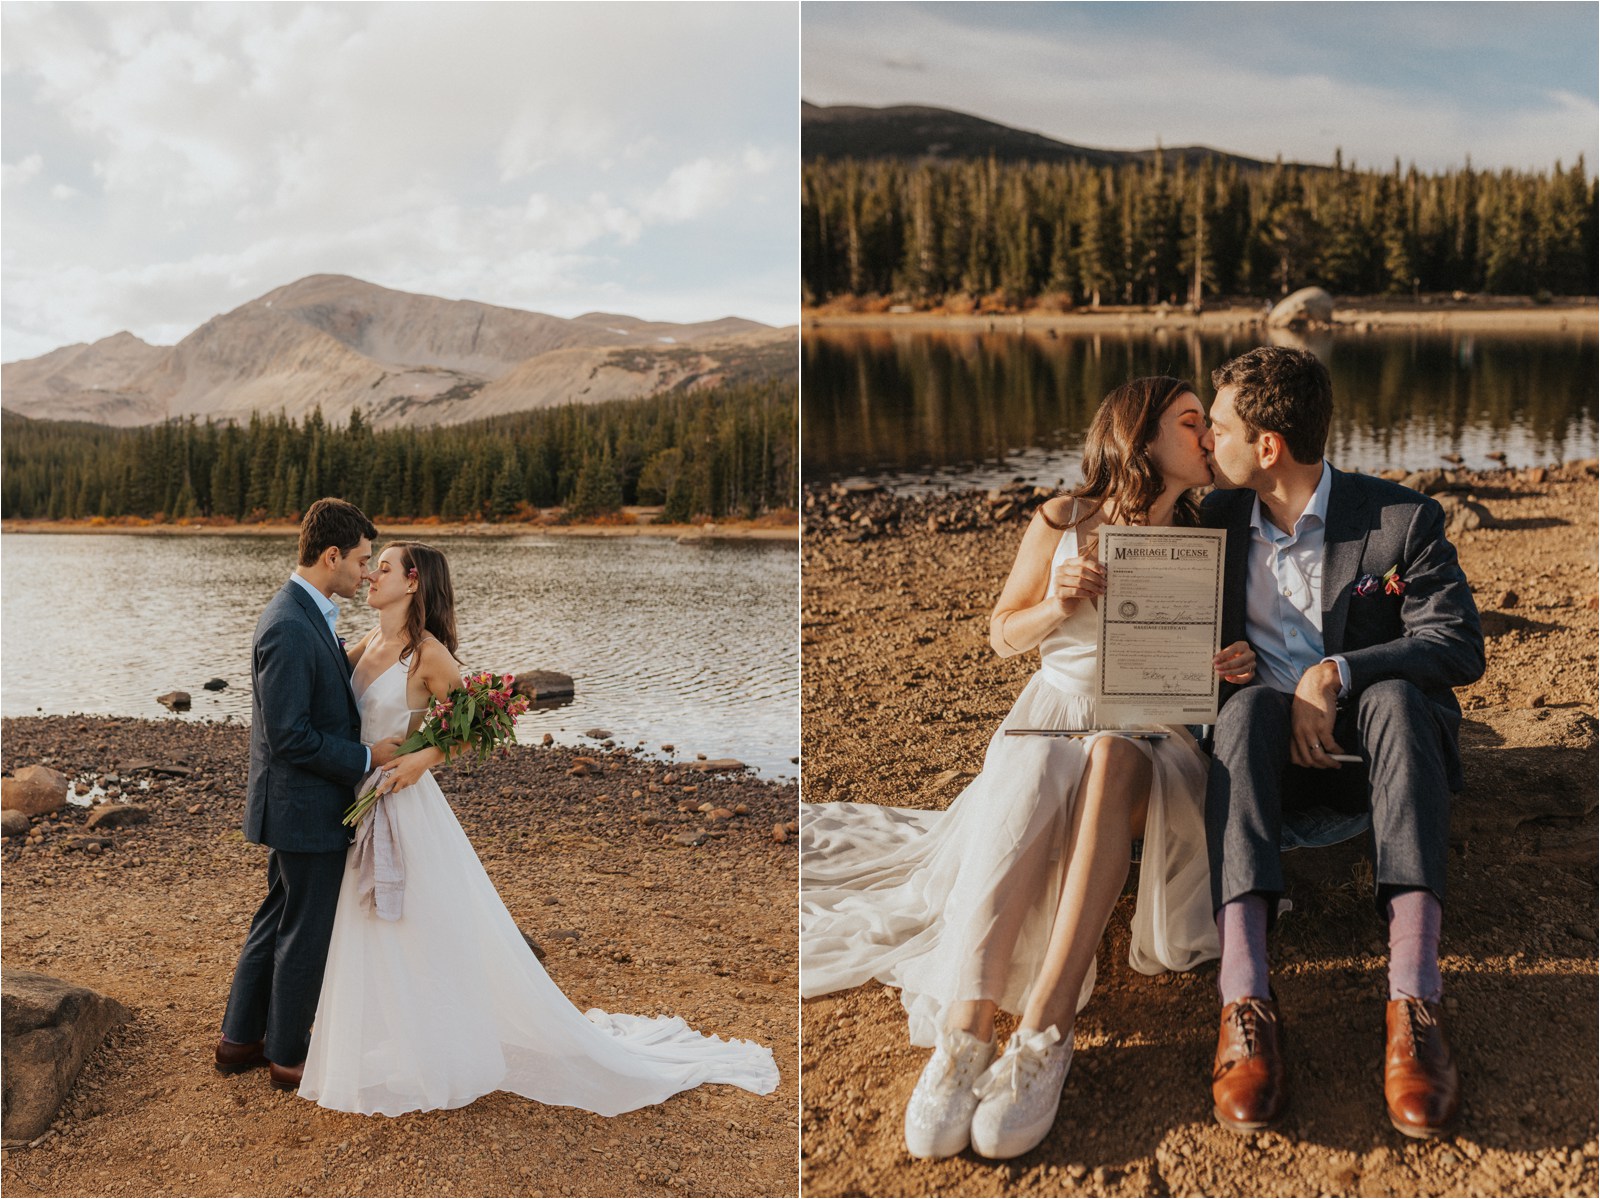 Bride and groom having their first kiss as a married couple, and signing their marriage license for their elopement in Colorado.